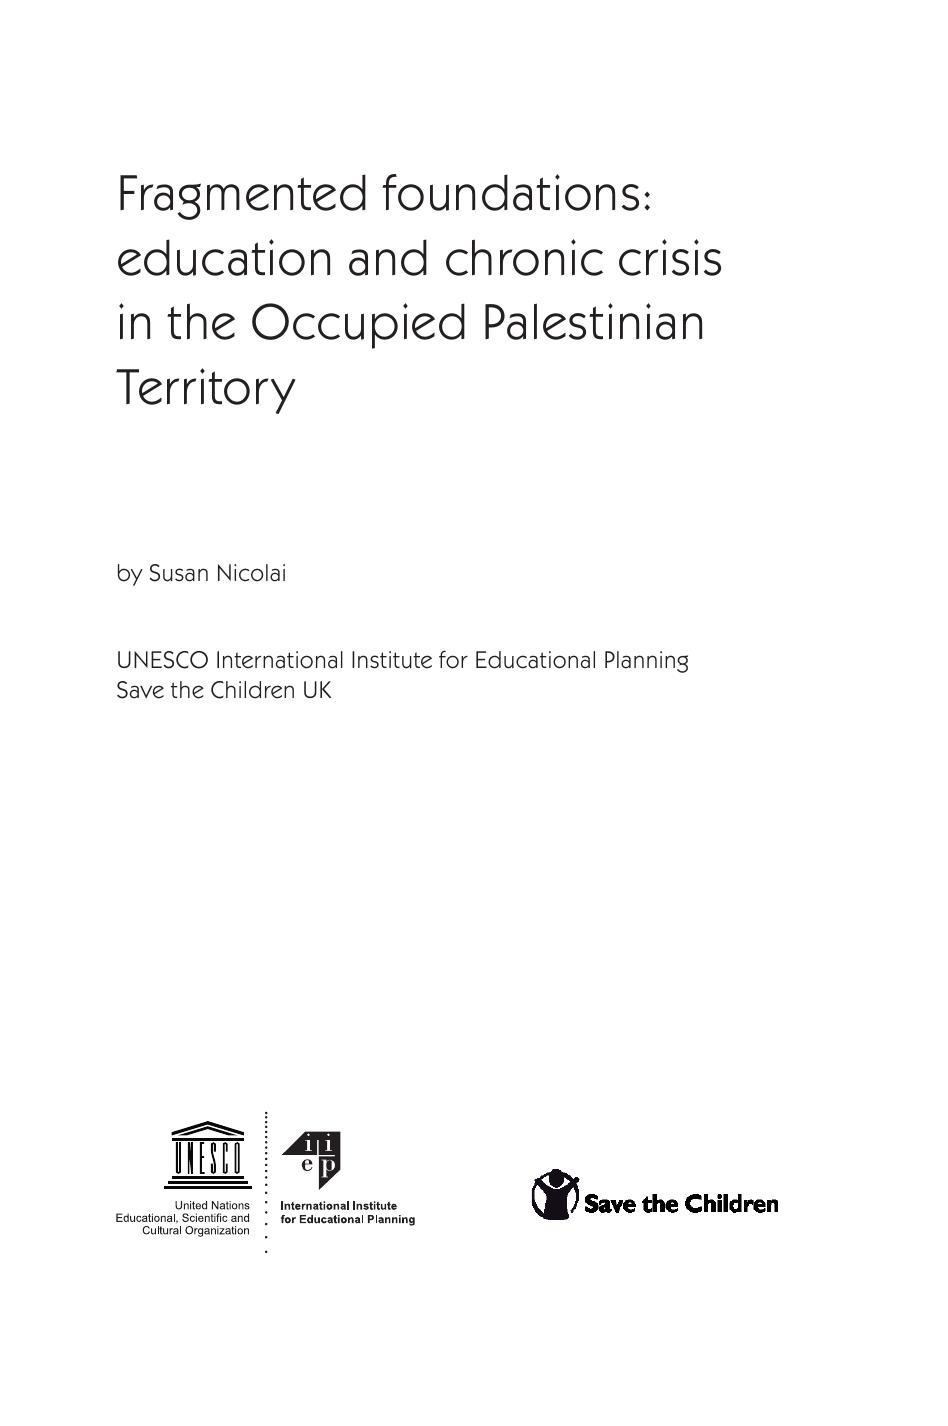 Fragmented foundations: education and chronic crisis in the Occupied Palestinian Territory; Education in emergencies and reconstruction: case studies; 2007